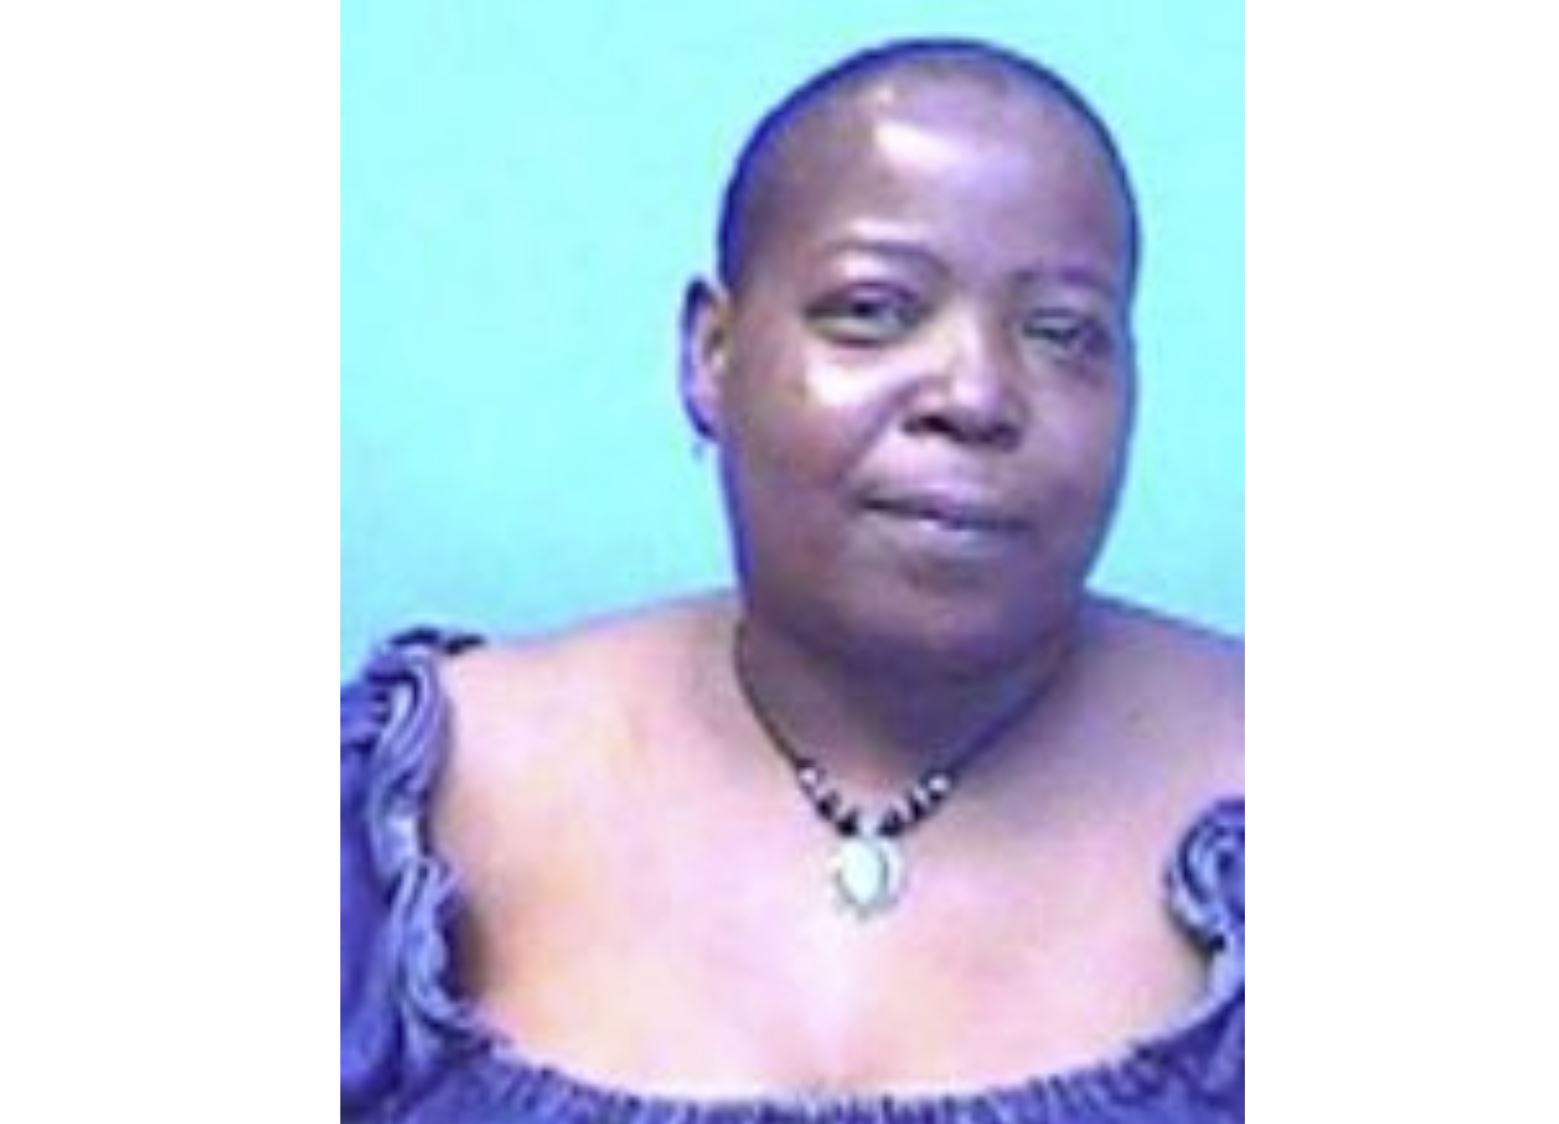 Missing and Endangered Person Alert: Woman disappeared from downtown Montgomery